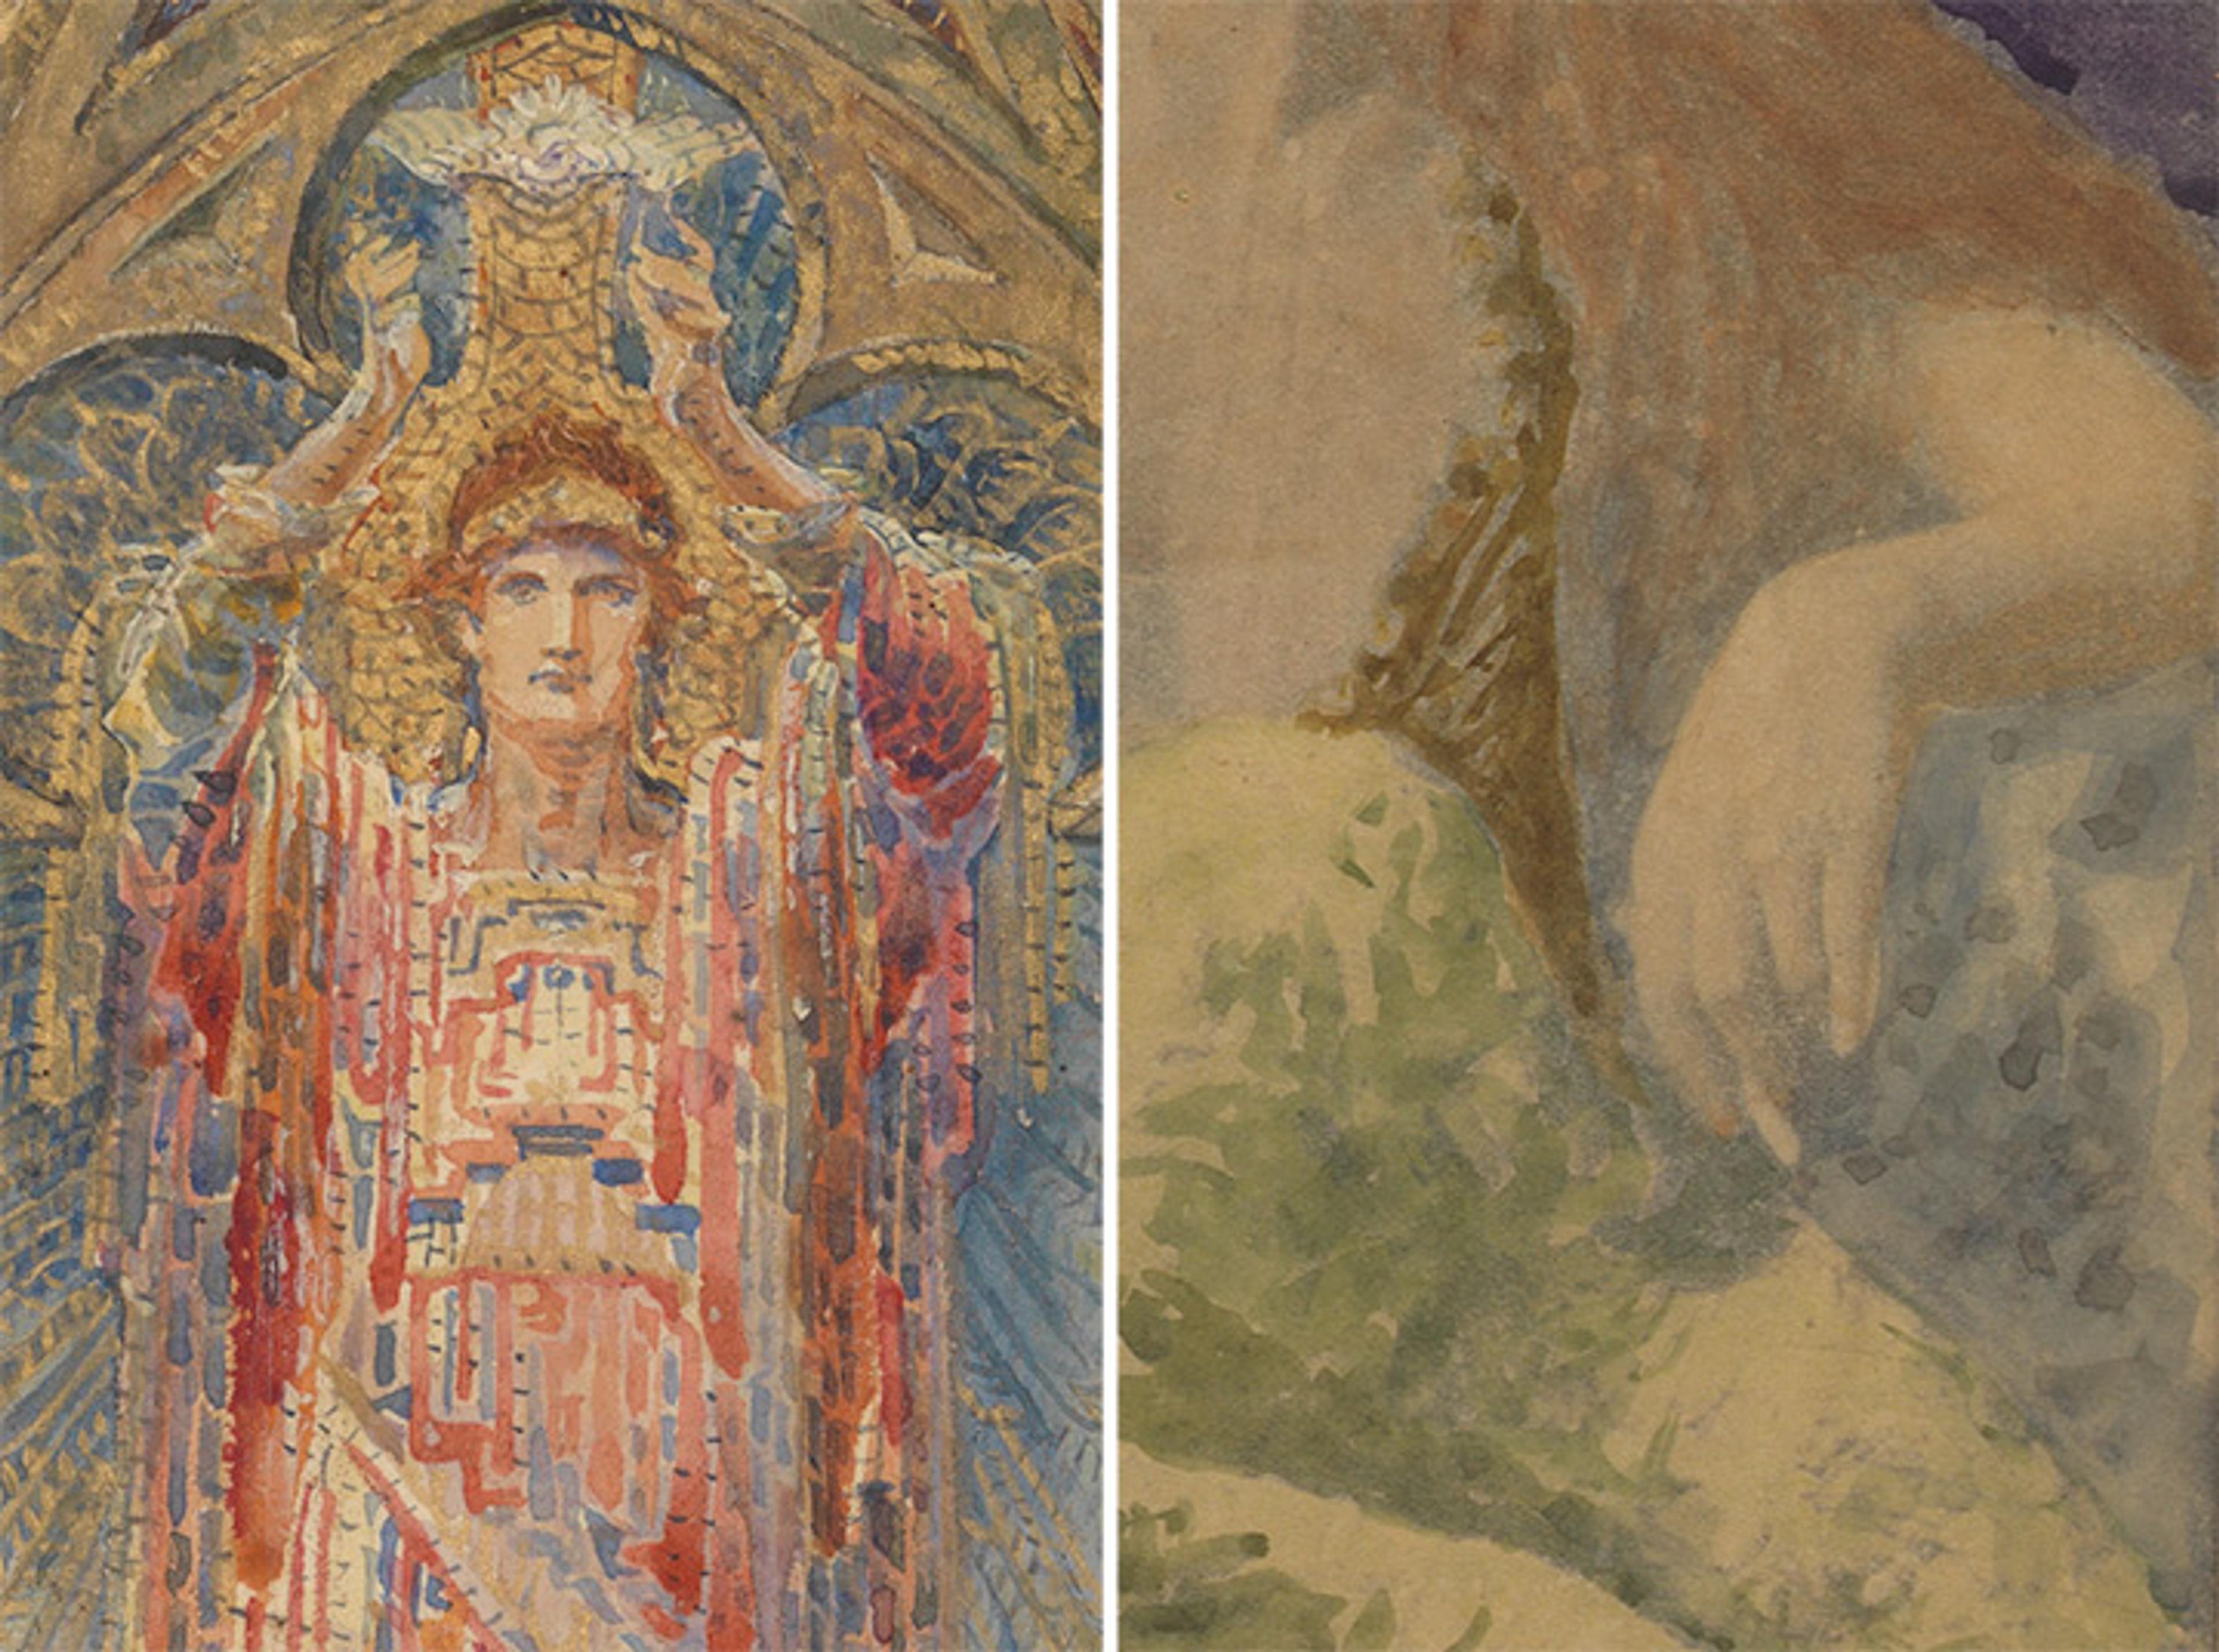 A comparison of two Louis Comfort Tiffany paintings